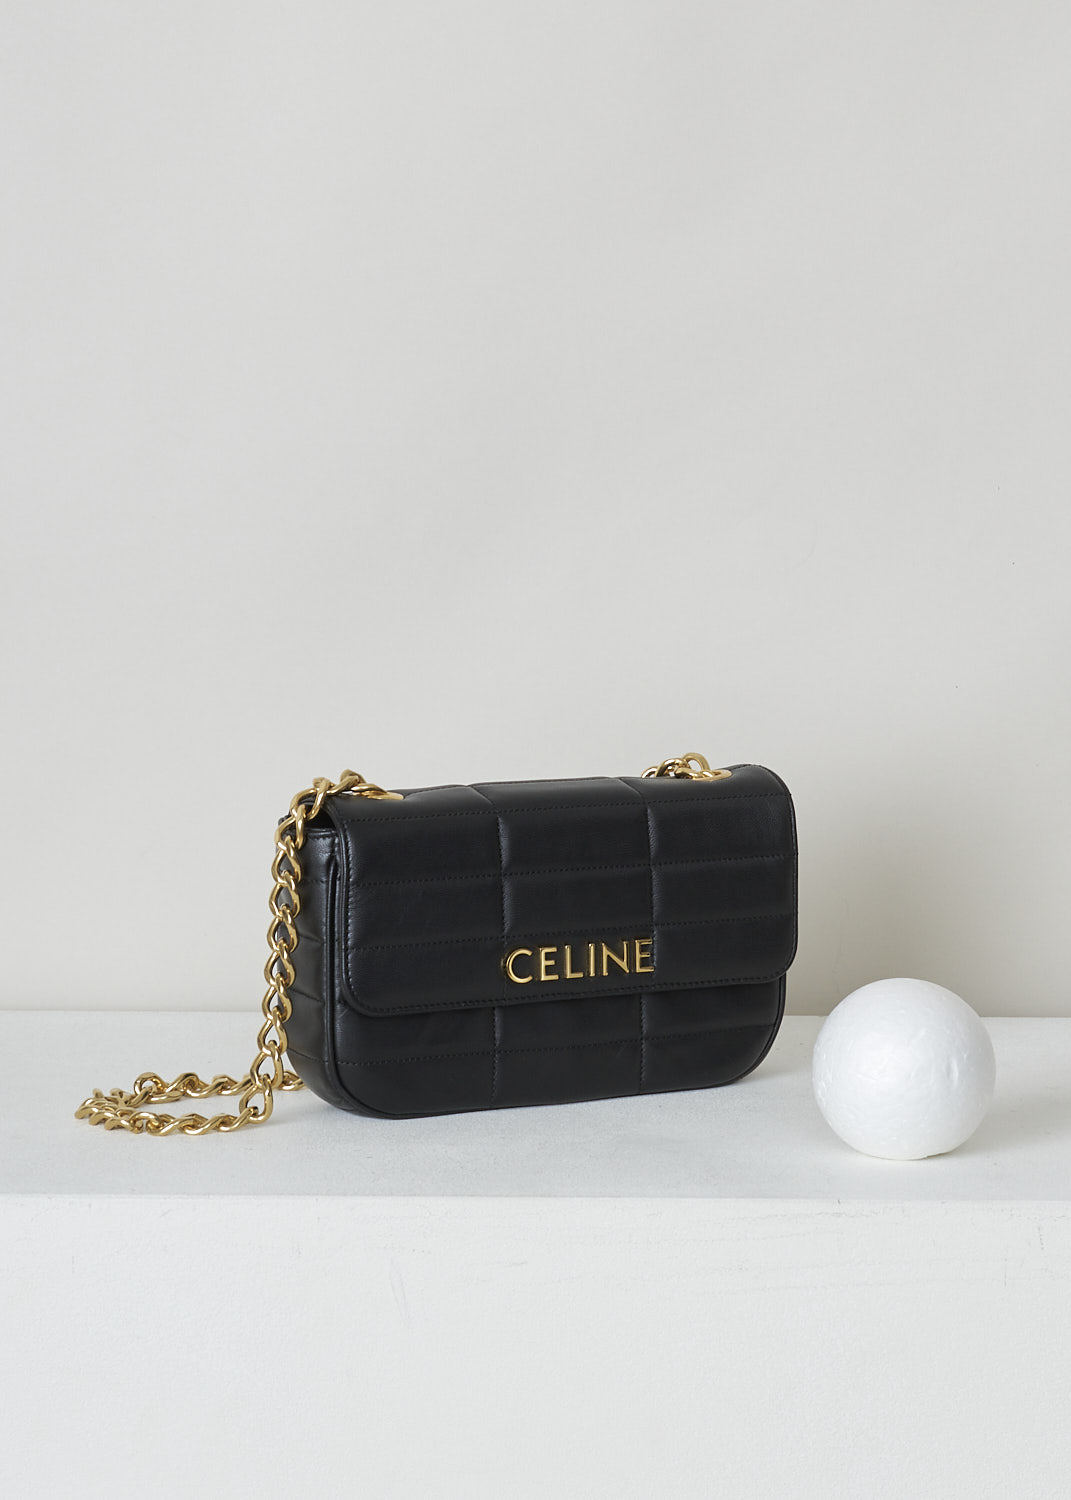 CELINE, BLACK MATELASSÃ‰ SHOULDER BAG WITH GOLD CHAIN, 111273EPZ_38NO, Black, Side, This black matelassÃ© shoulder bag has gold-tone metal hardware with the brand's lettering on the front and a gold chain shoulder strap. The bag has a snap button closure. The flap opens to the main compartment with a inner pocket to the backside


